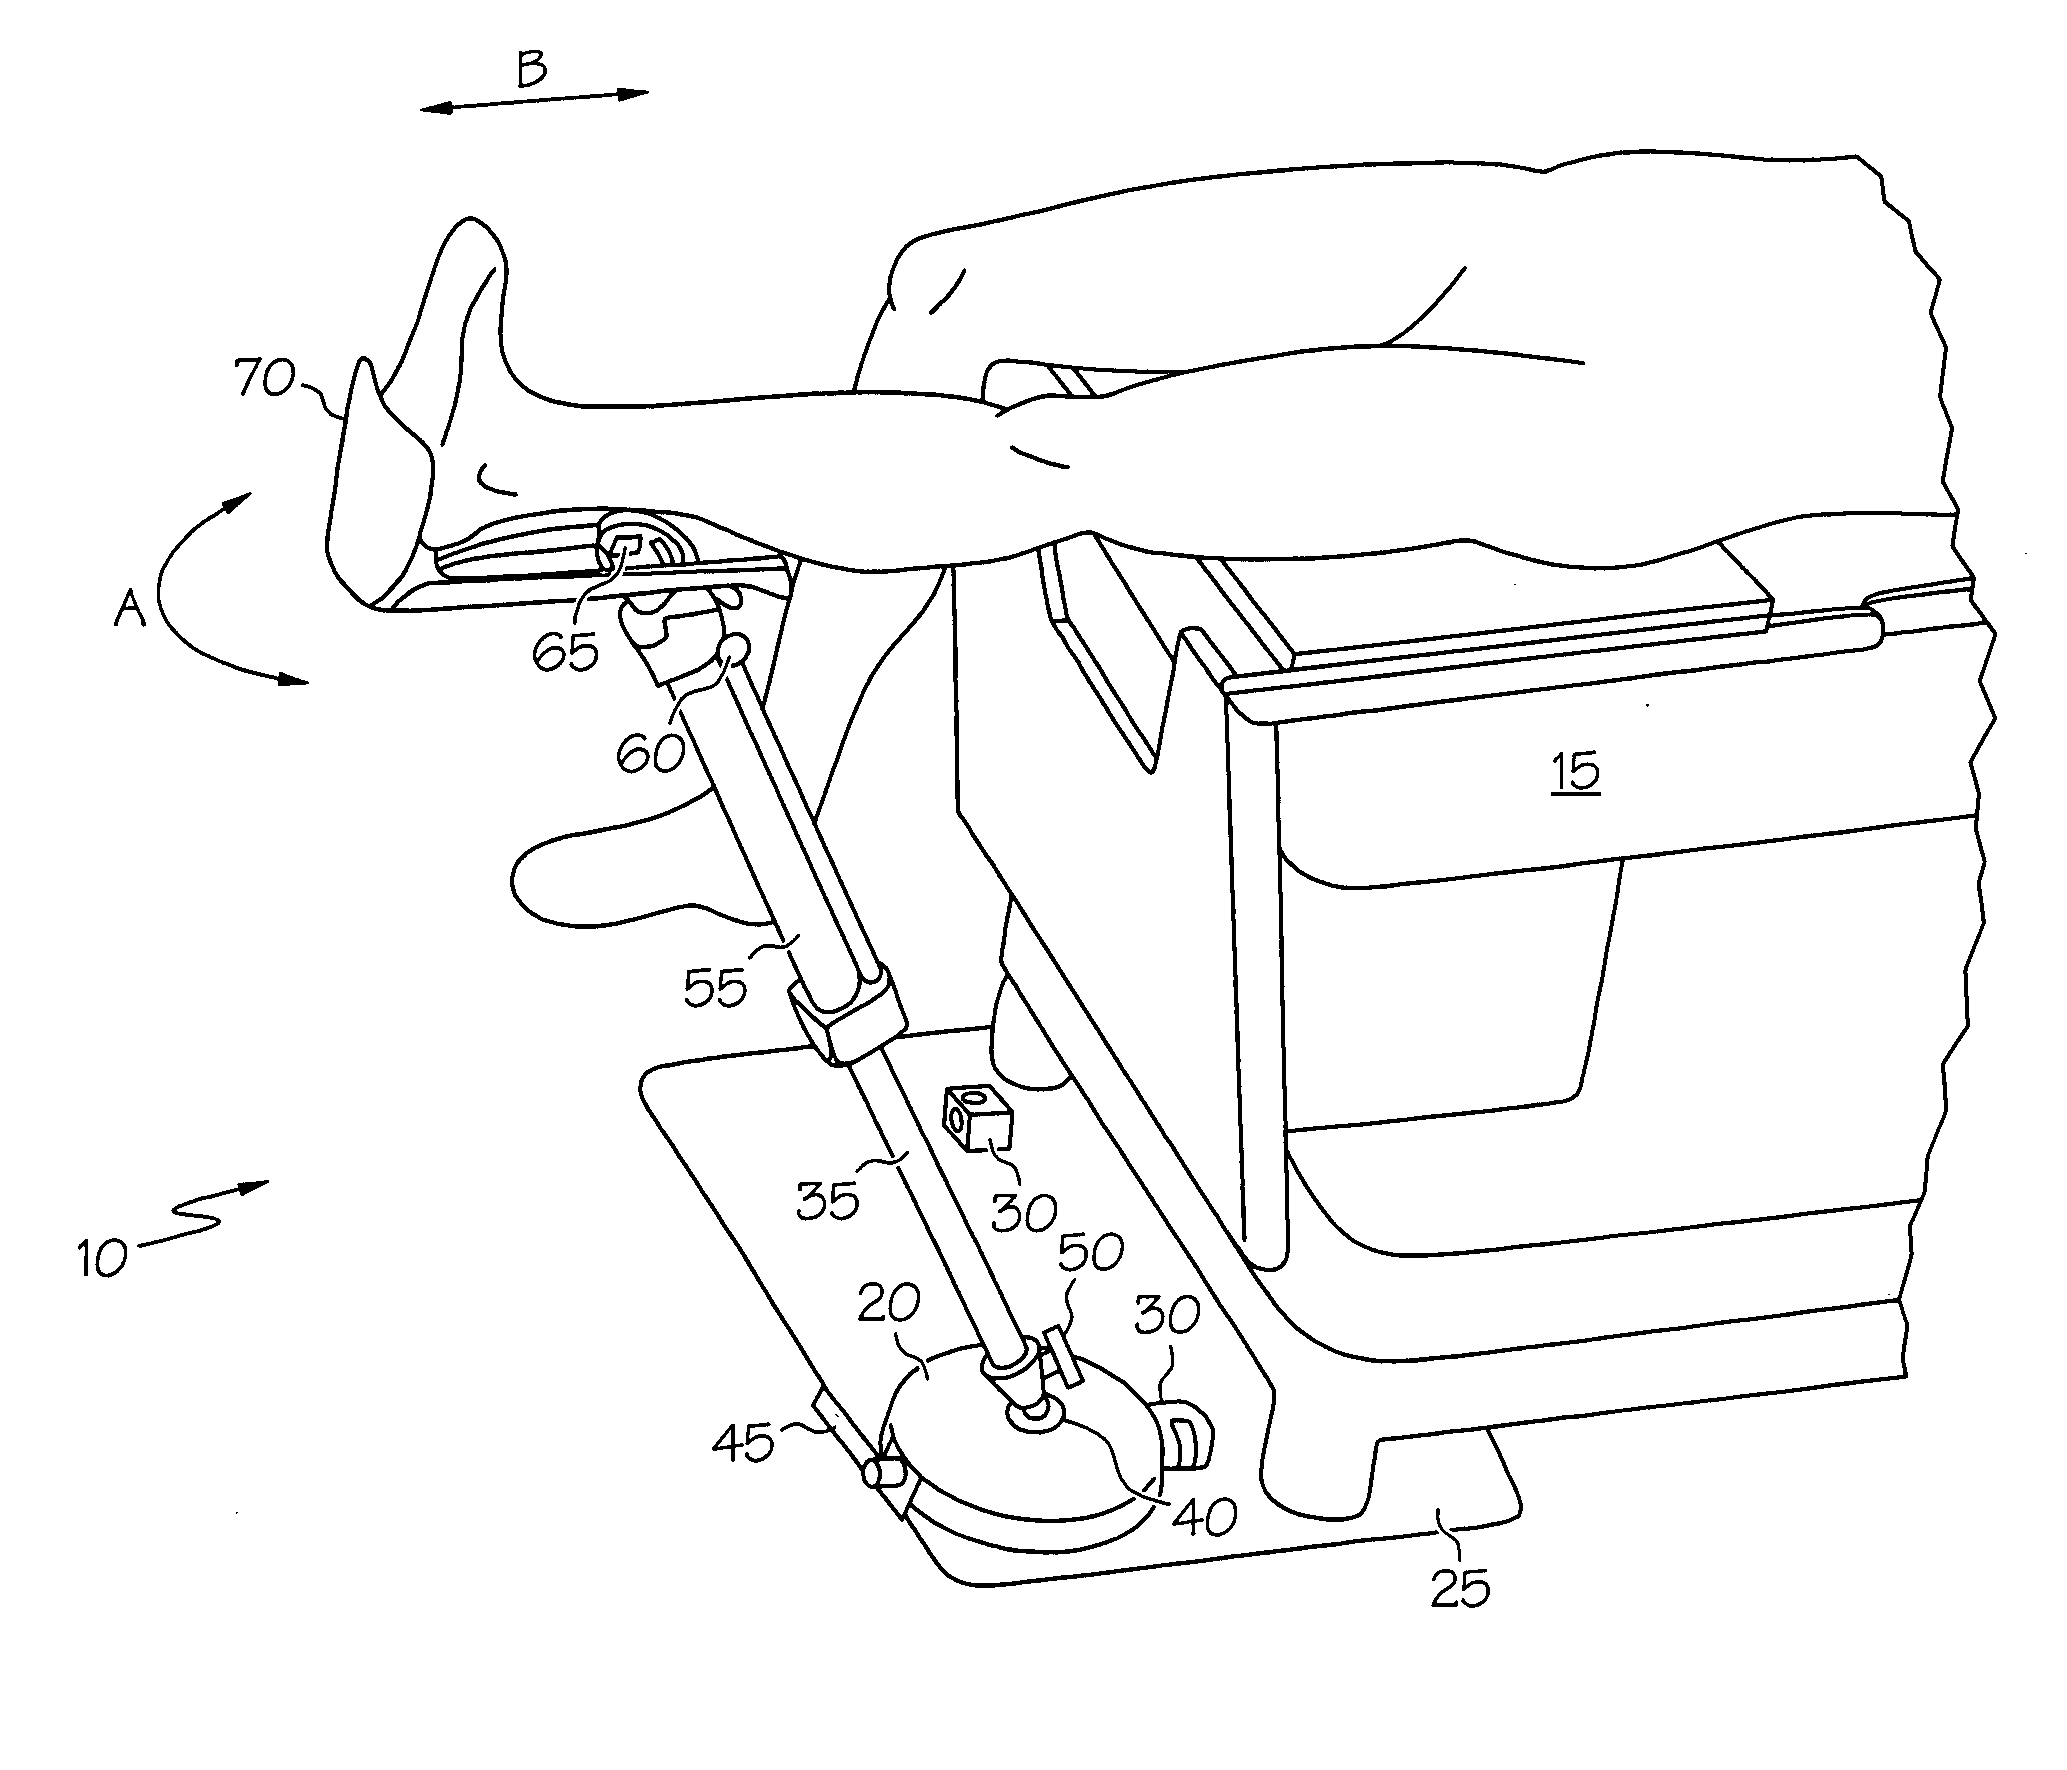 Surgical positioning apparatus